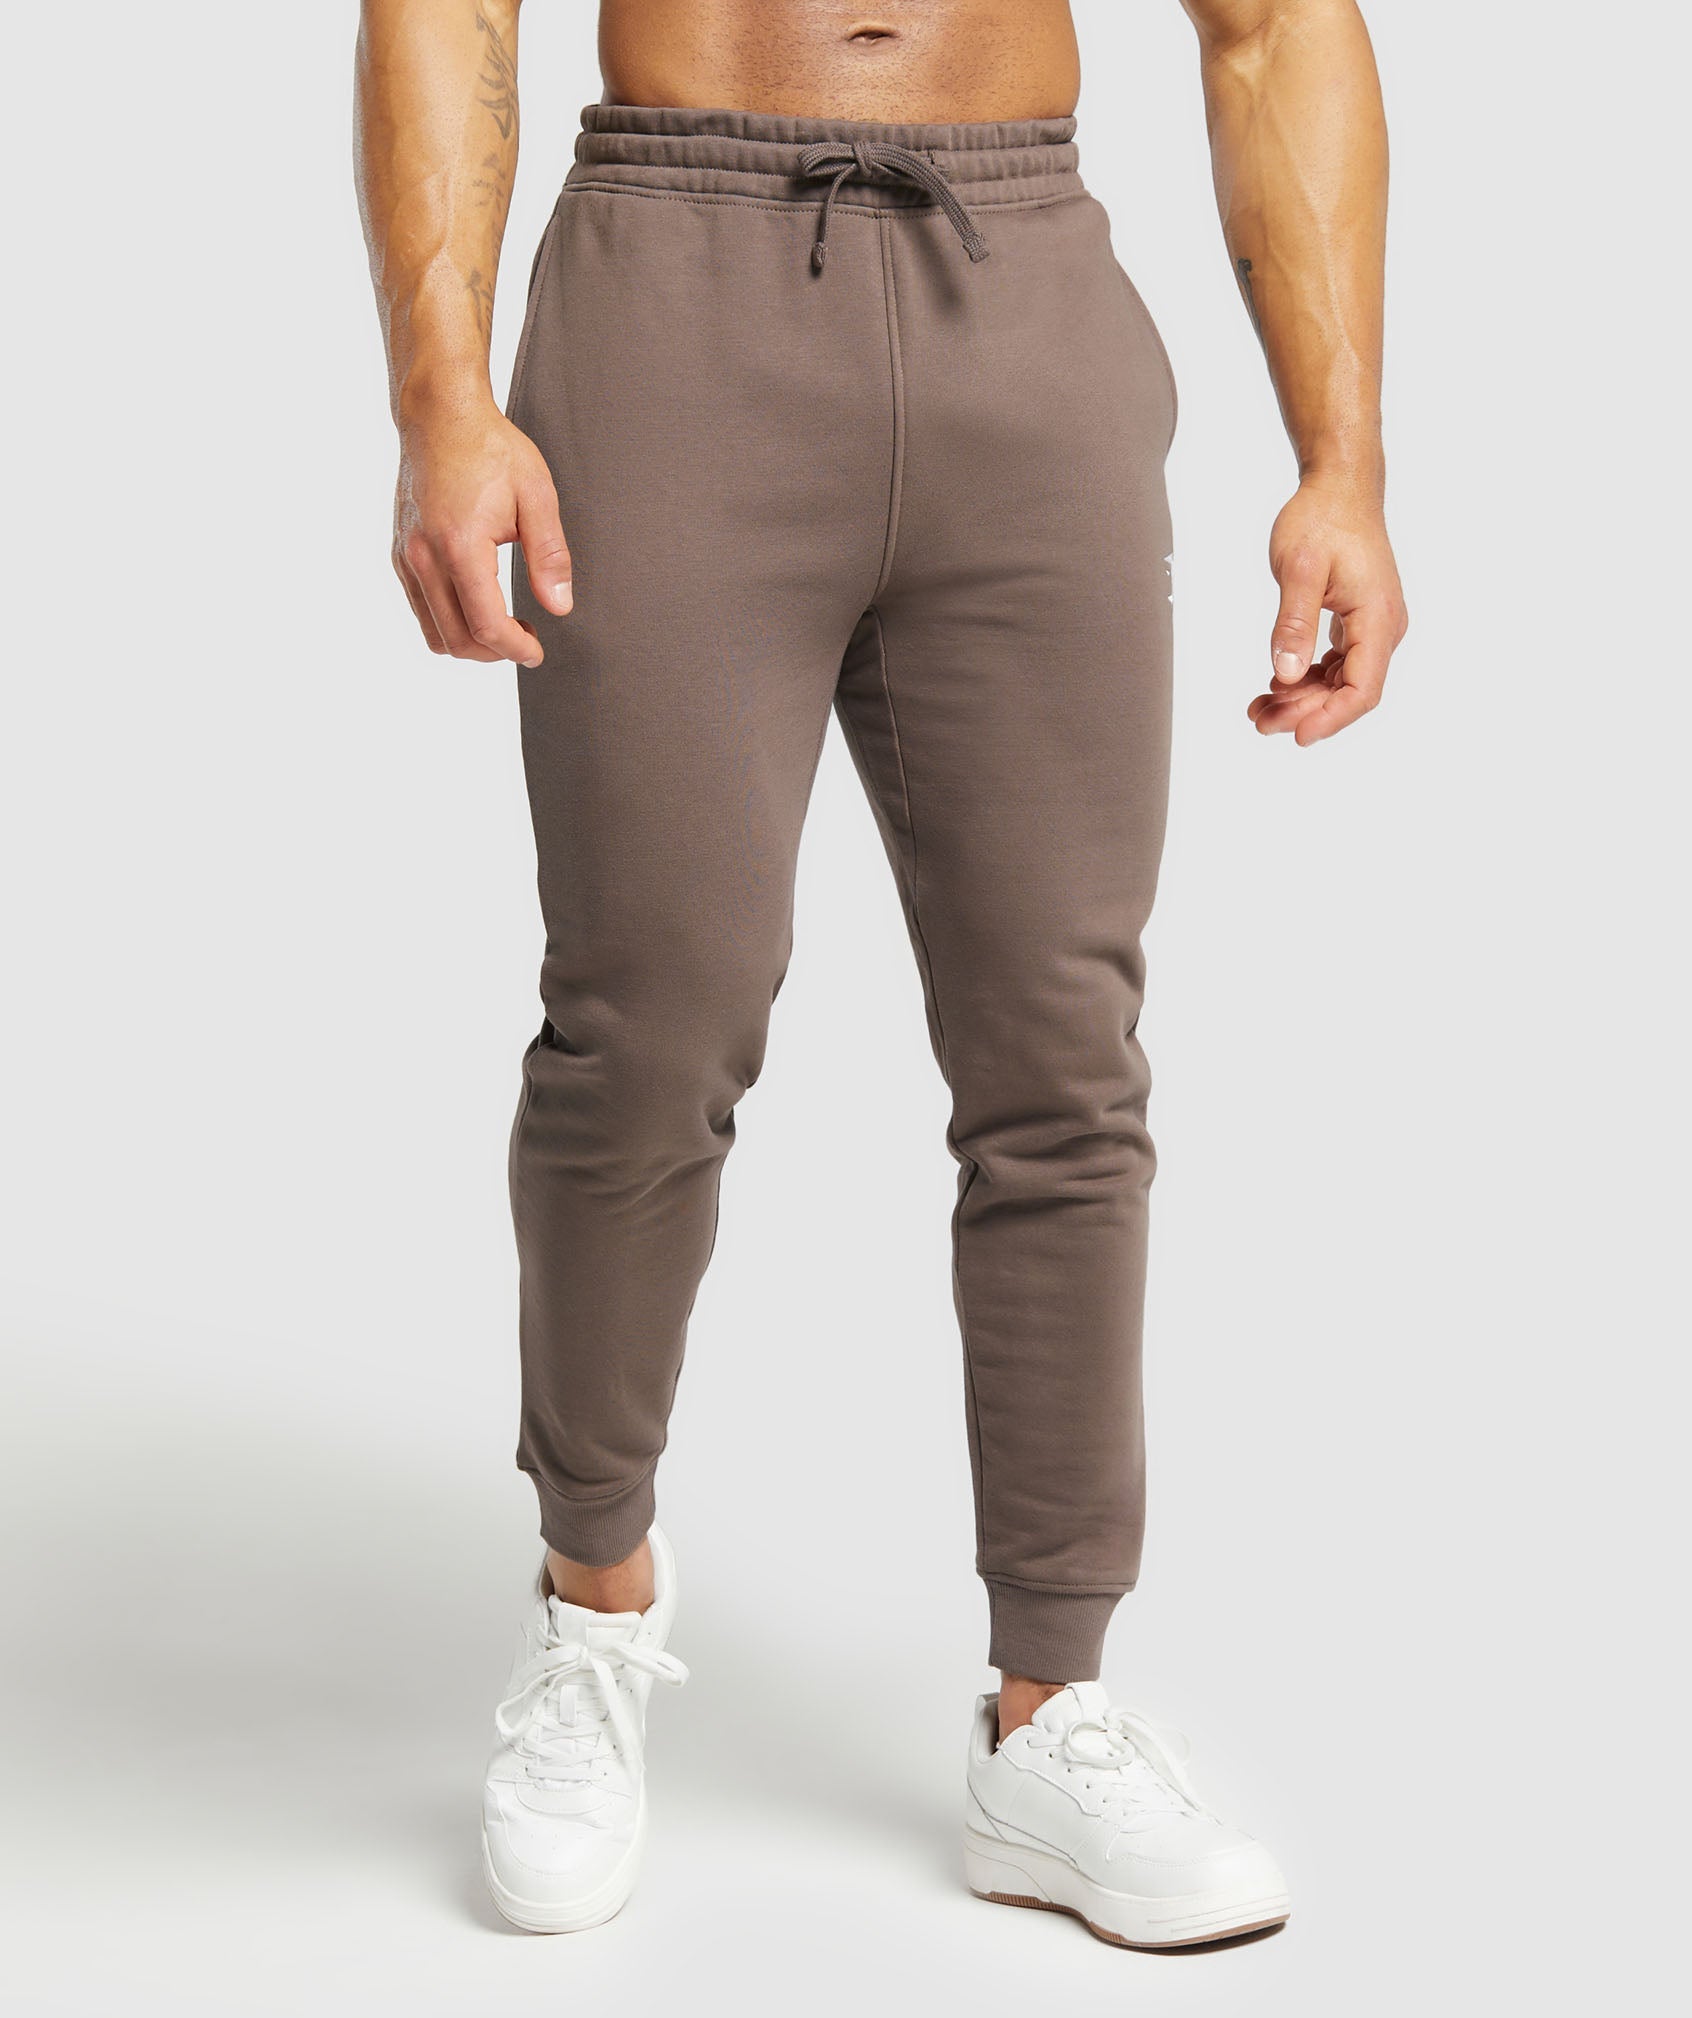 Crest Joggers in Truffle Brown